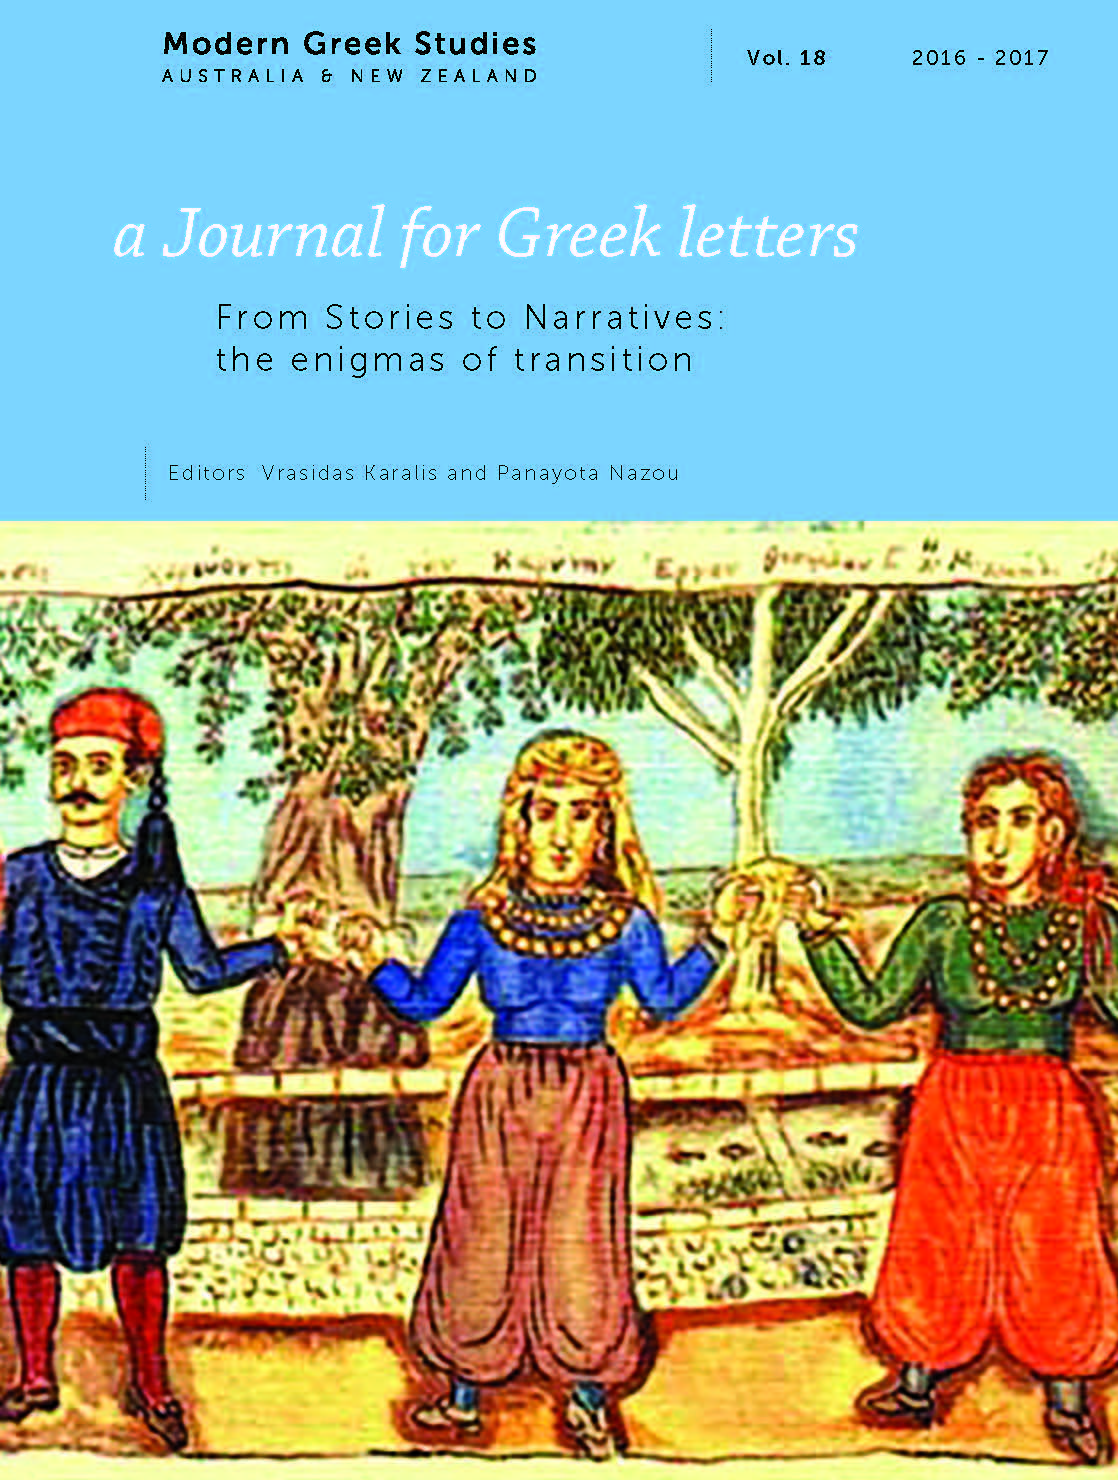 					View Vol. 18 (2017): From stories to narratives: the enigmas of transition
				